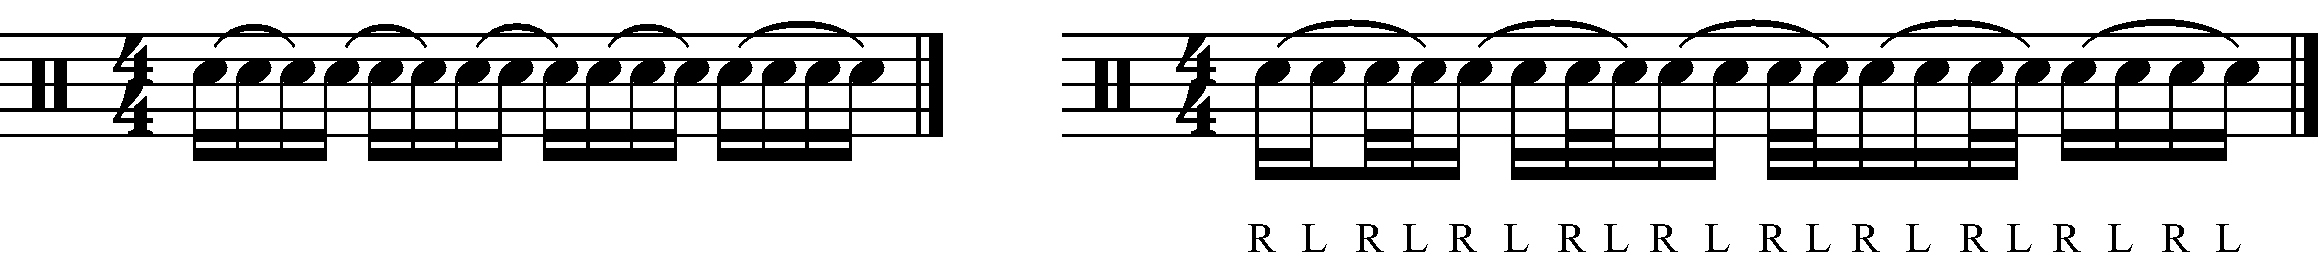 The base rhythm for the fill